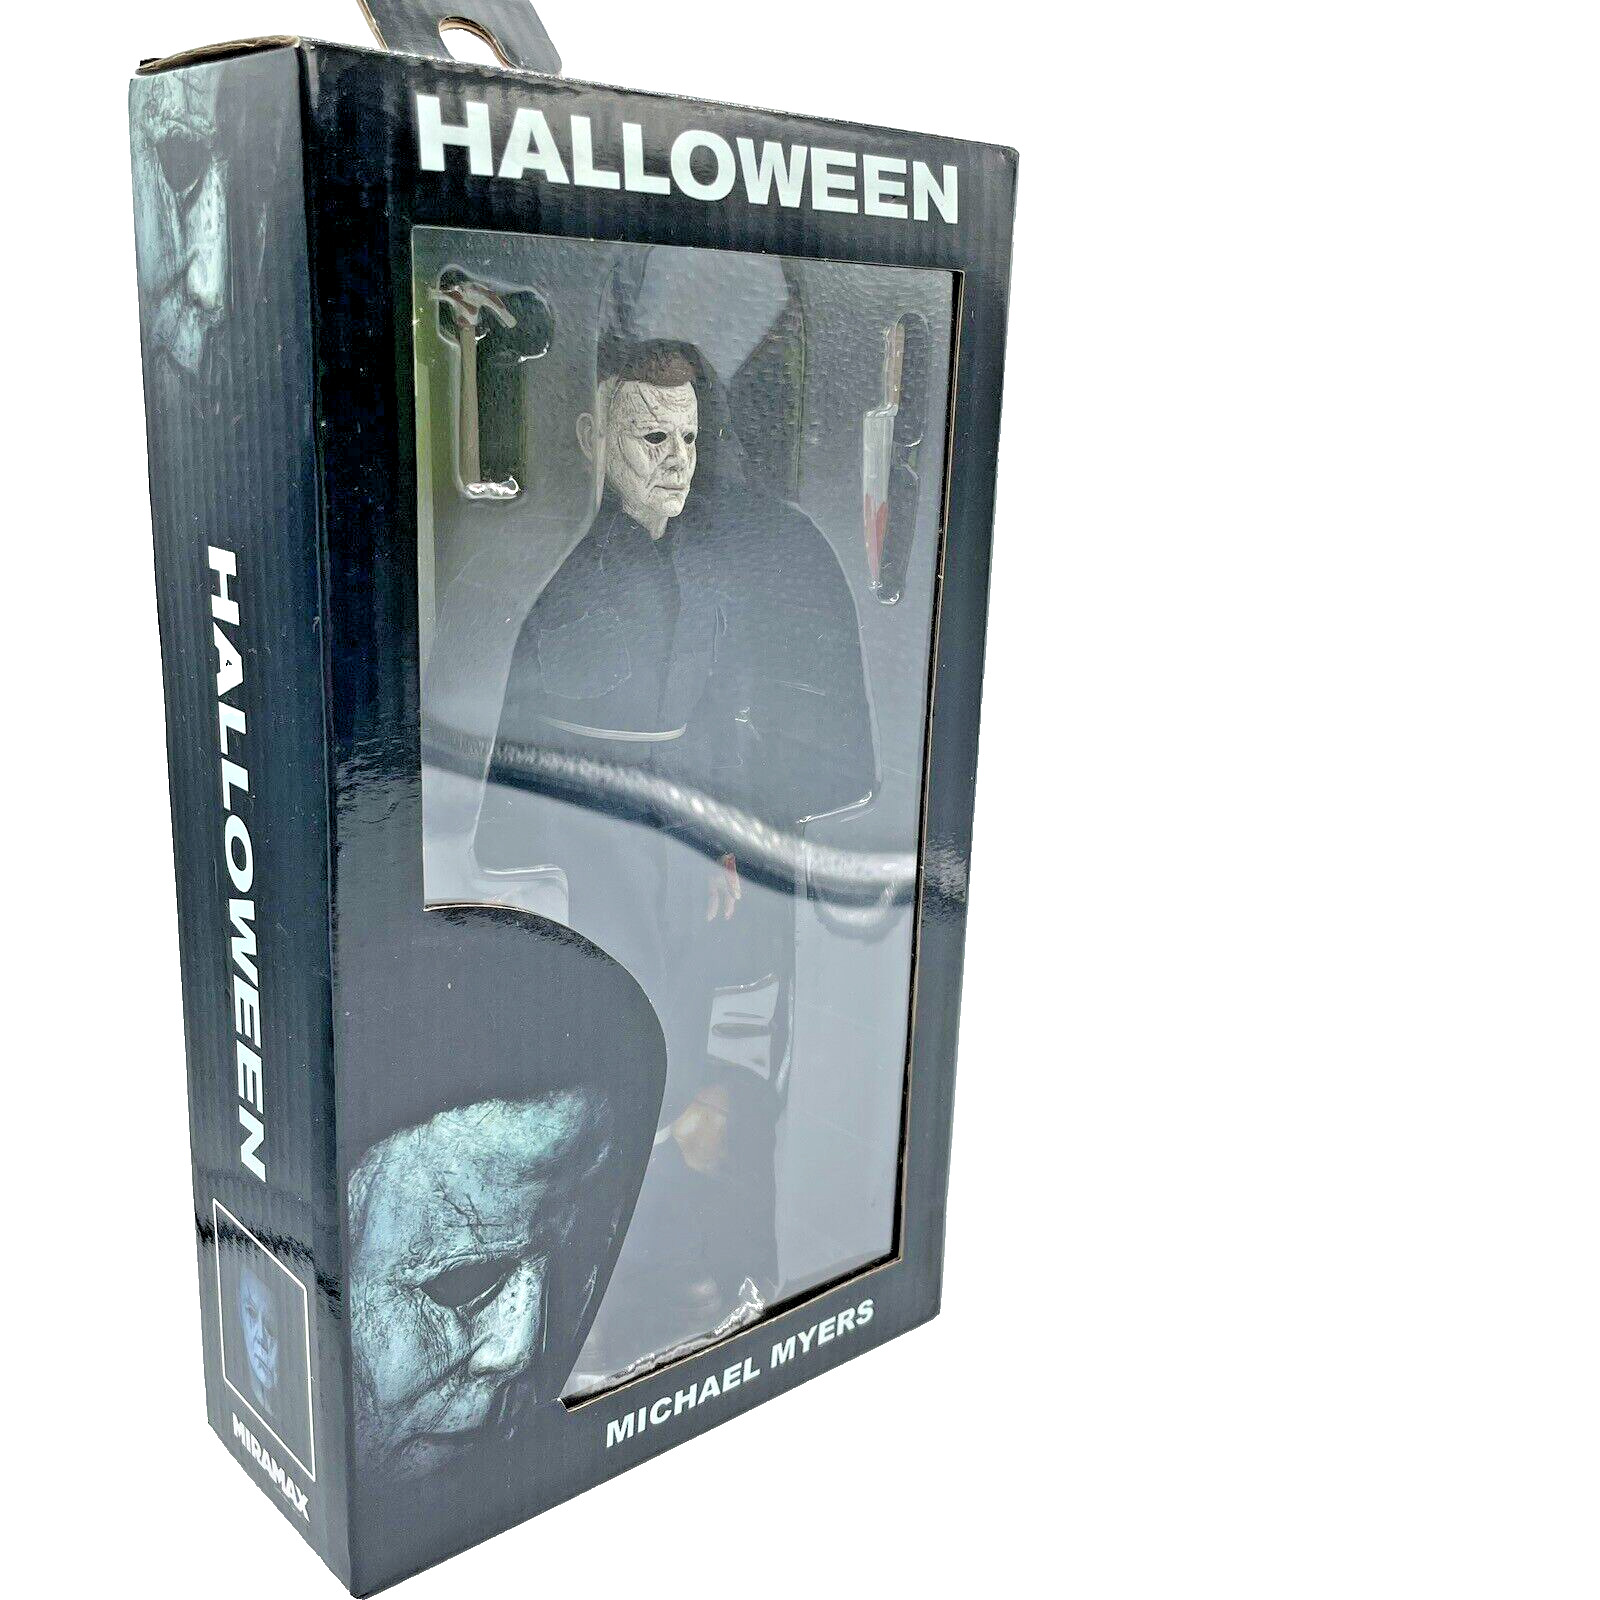 NECA Halloween Movie Michael Myers Clothes 2018 Action Figure Miramax With Blood